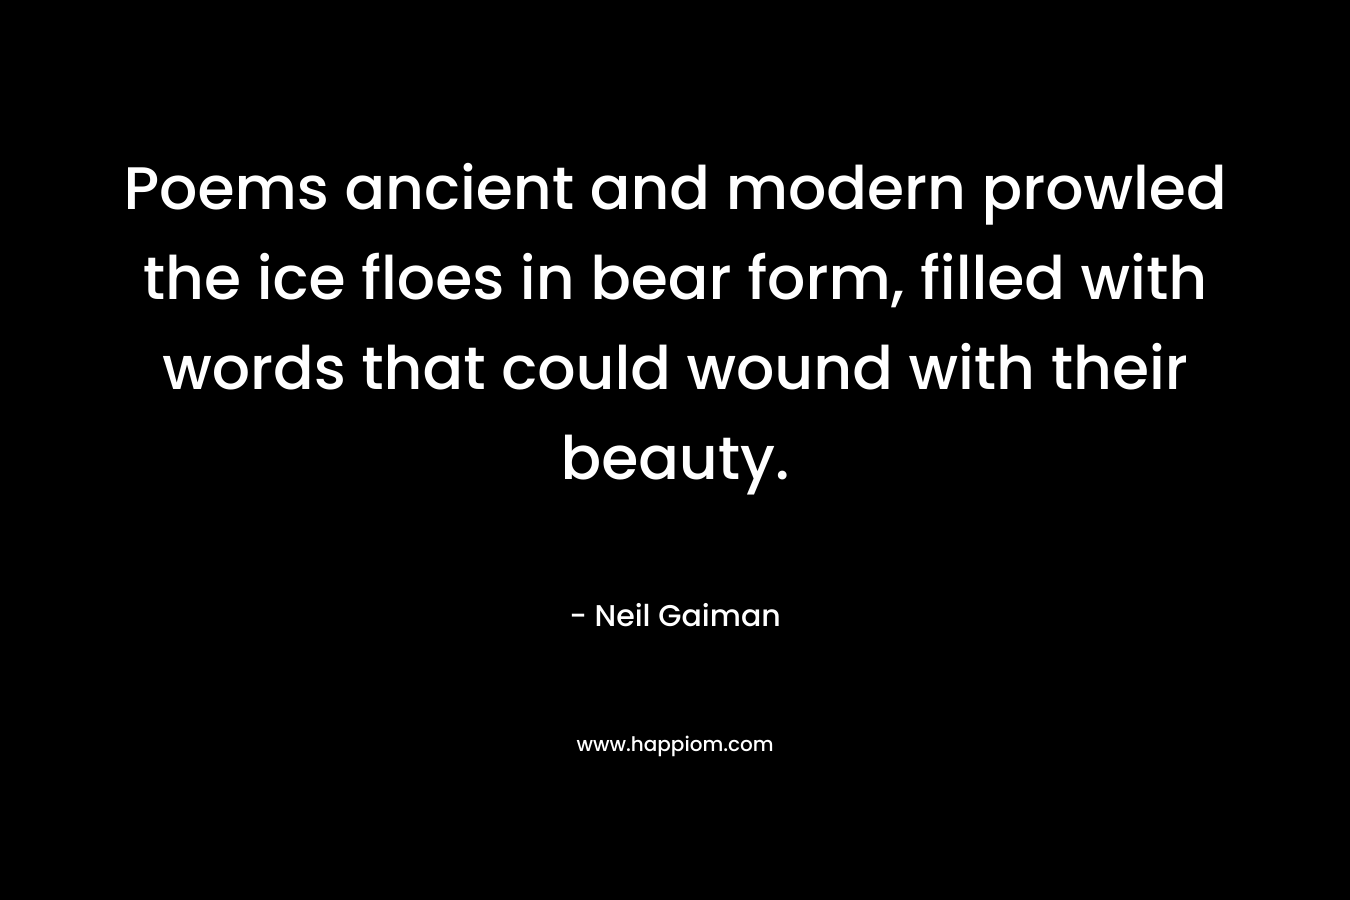 Poems ancient and modern prowled the ice floes in bear form, filled with words that could wound with their beauty. – Neil Gaiman